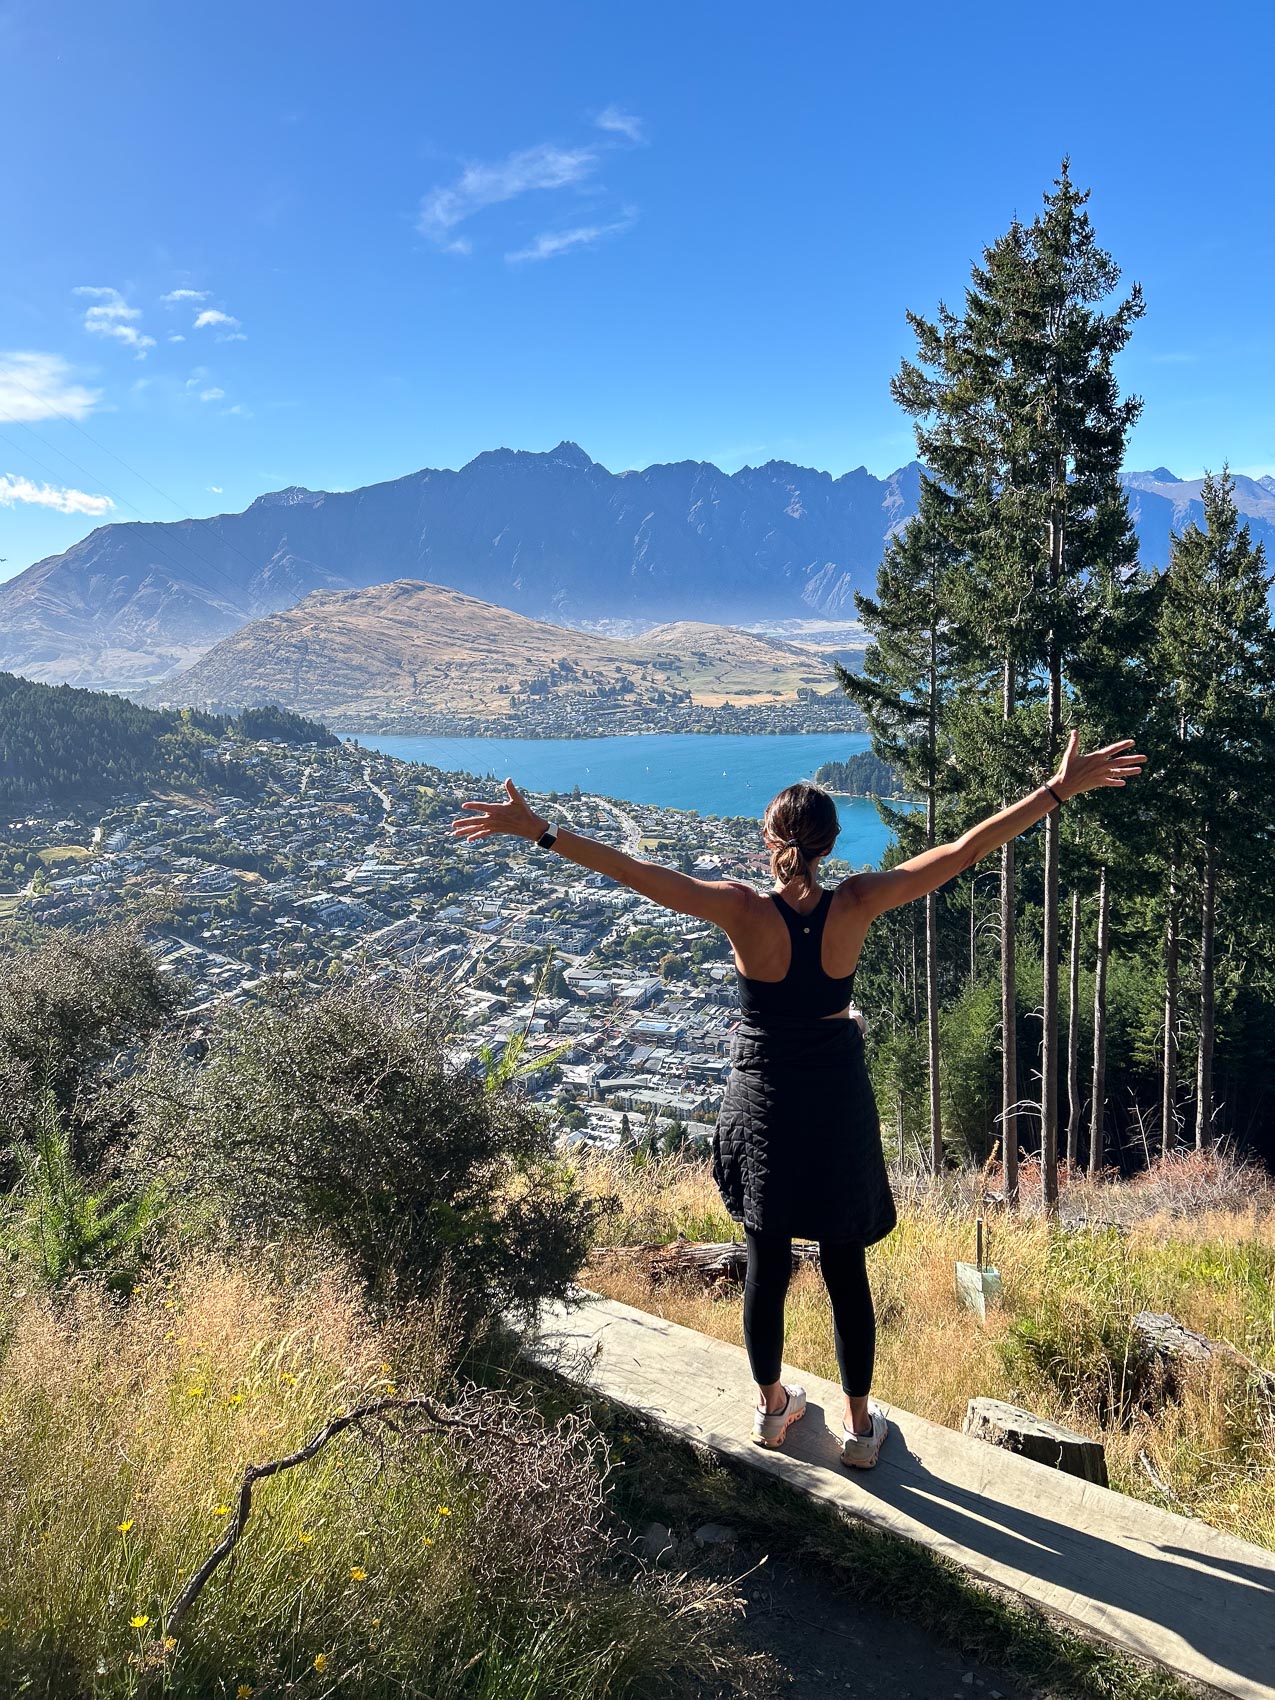 What we did on the South Island of New Zealand